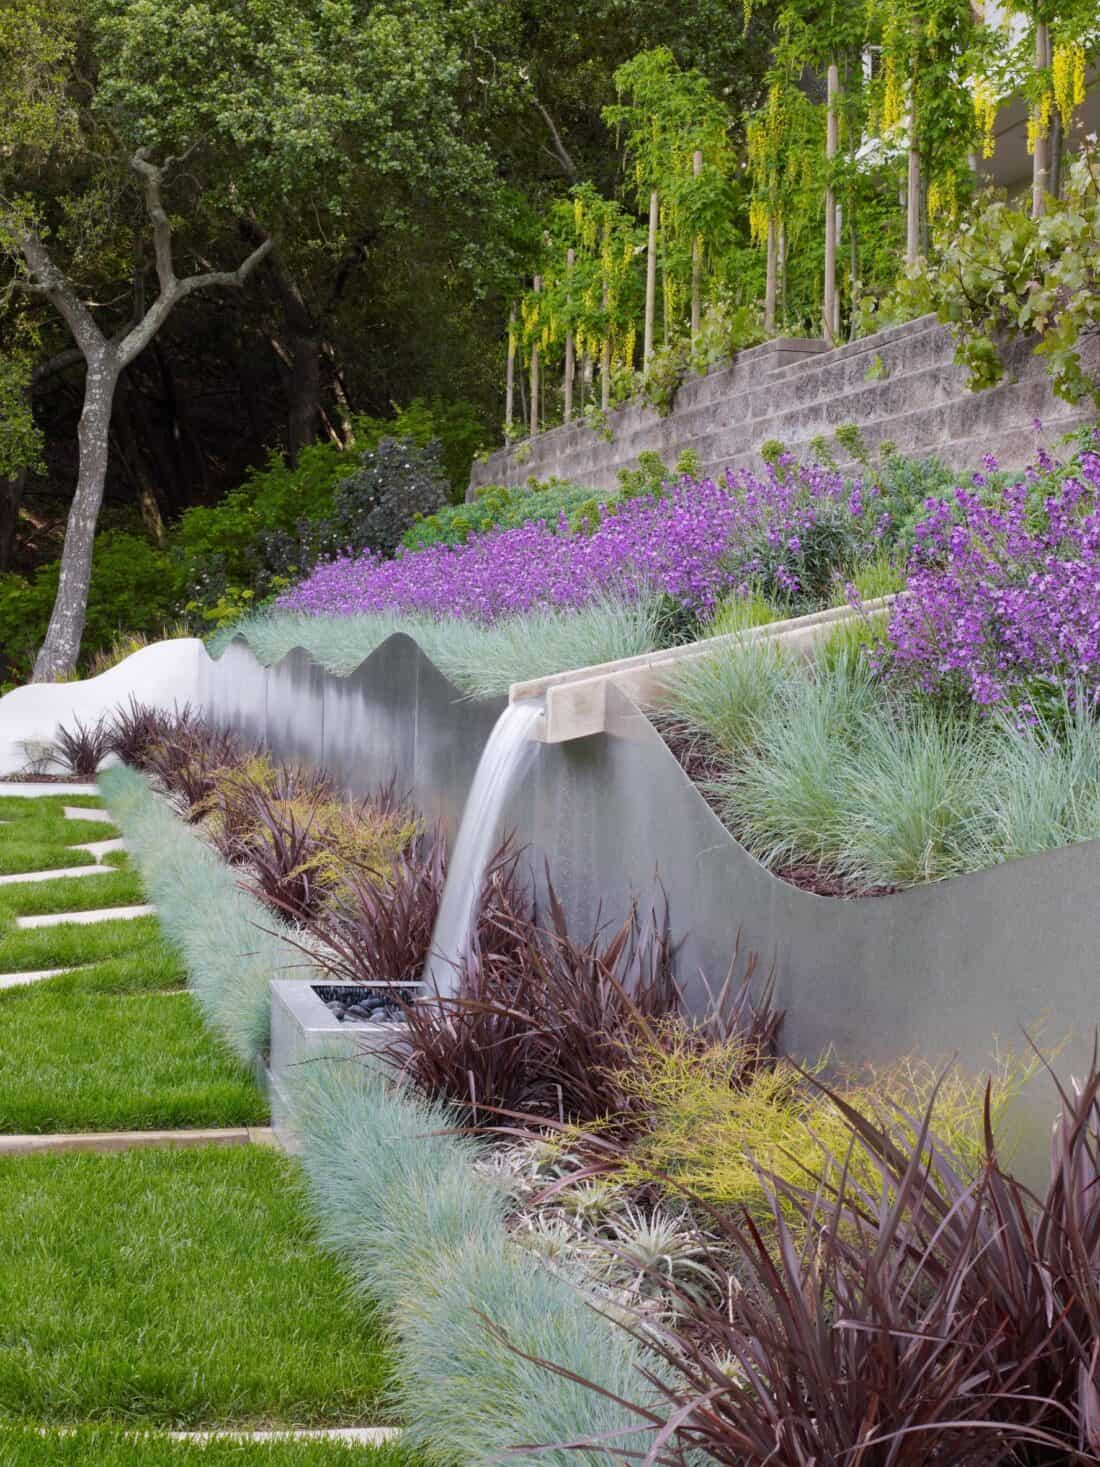 A landscaped garden in Los Gatos features tiered flower beds with lush grasses and purple flowers. A cascading water feature runs along a concrete wall, while a tree stands in the background. Stone pavers set amid the green lawn lead through this picturesque Garden Gallery.